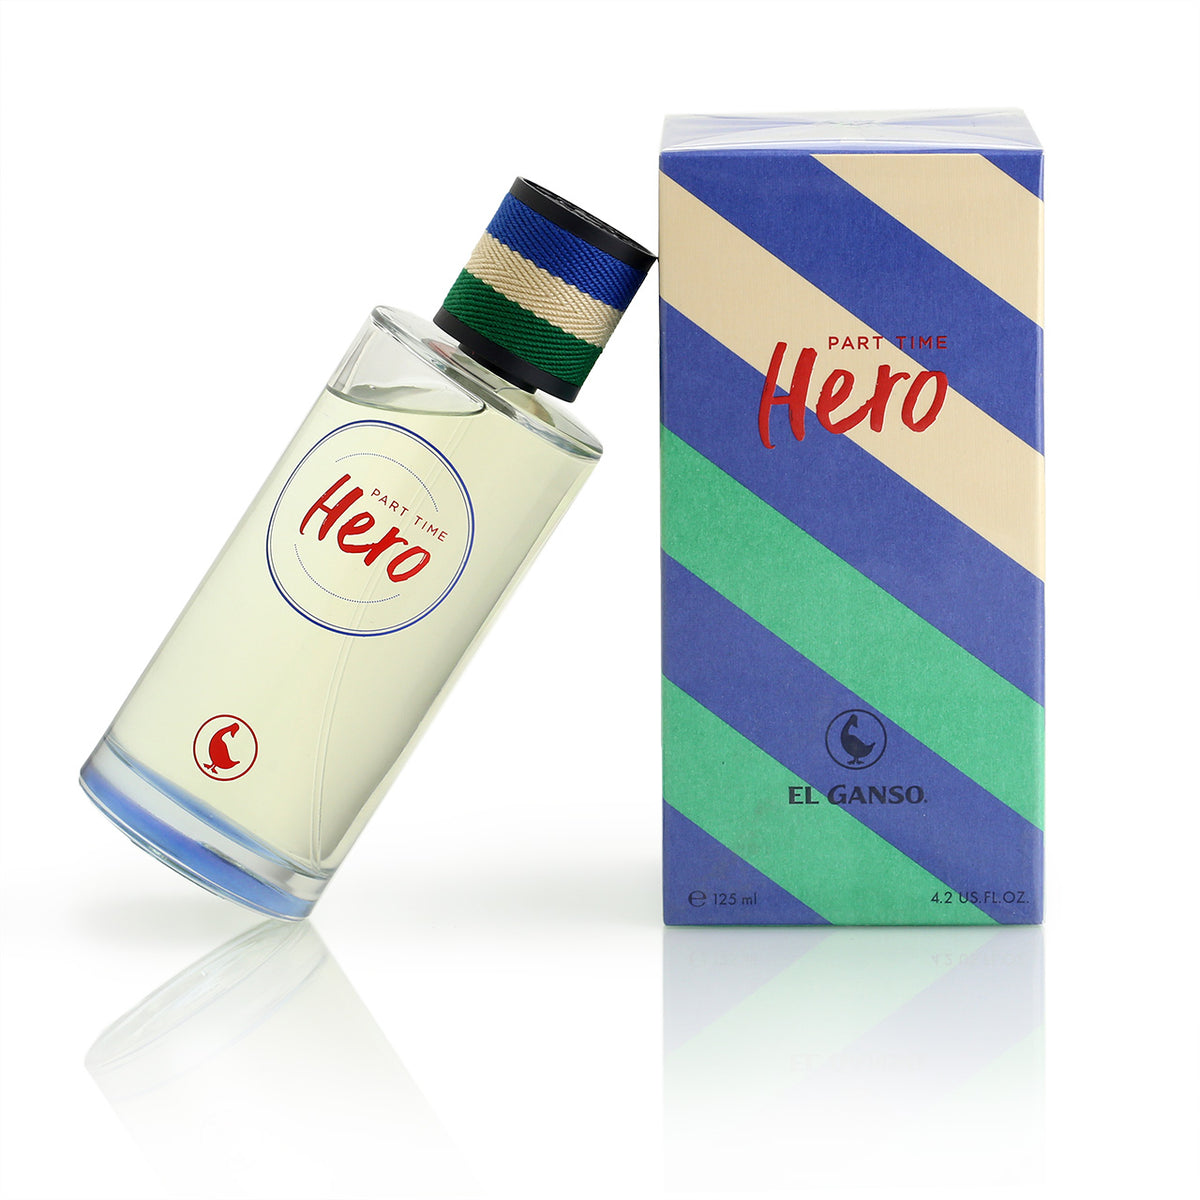 Part Time Herp EDT bottle with it&#39;s graphicly printed packaging